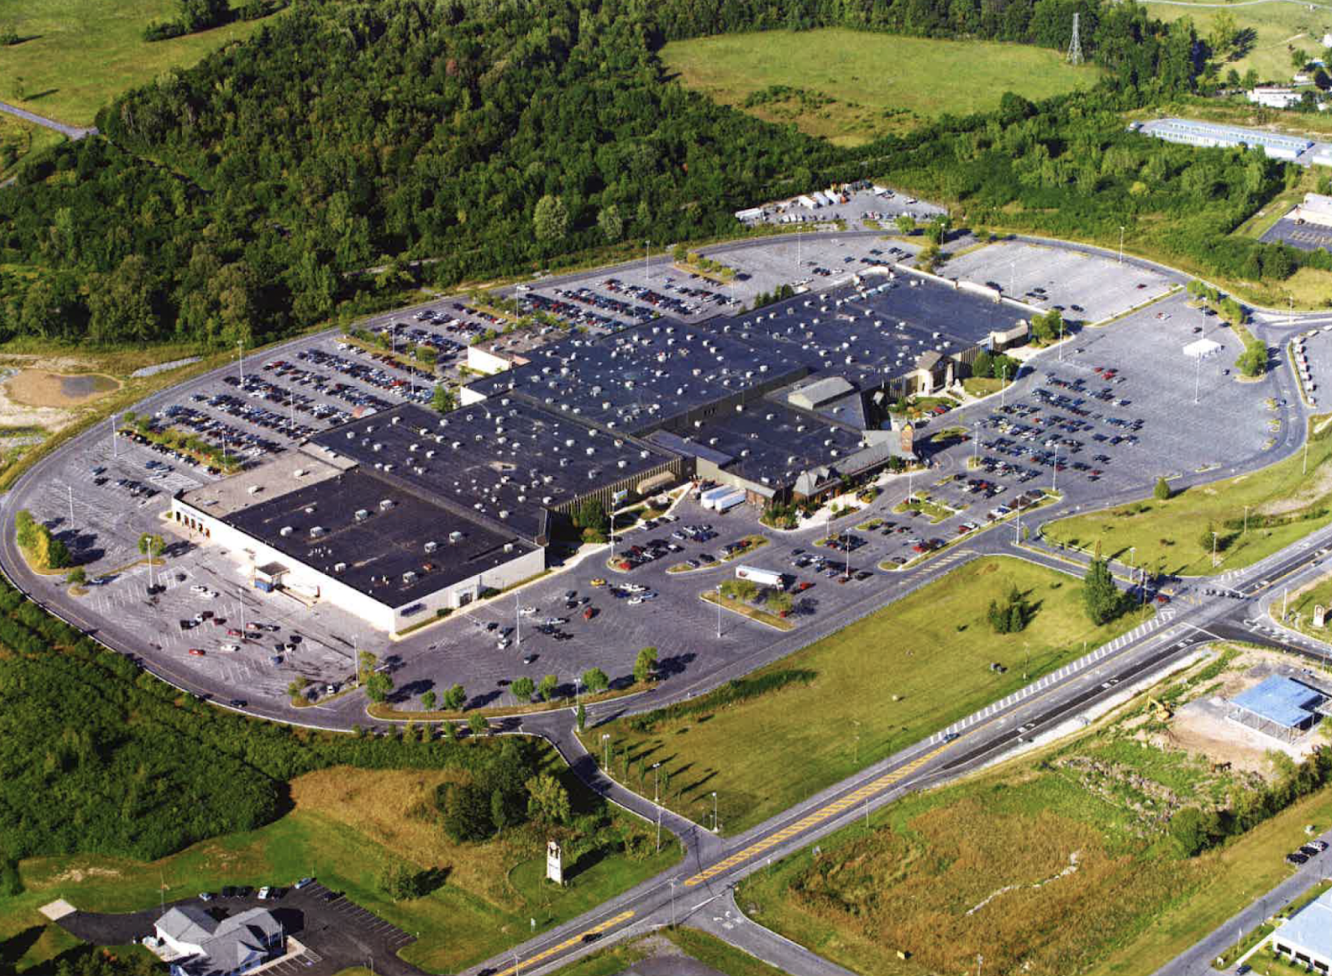 Aerial image of Fingerlakes Mall provided by Fingerlakes Mall